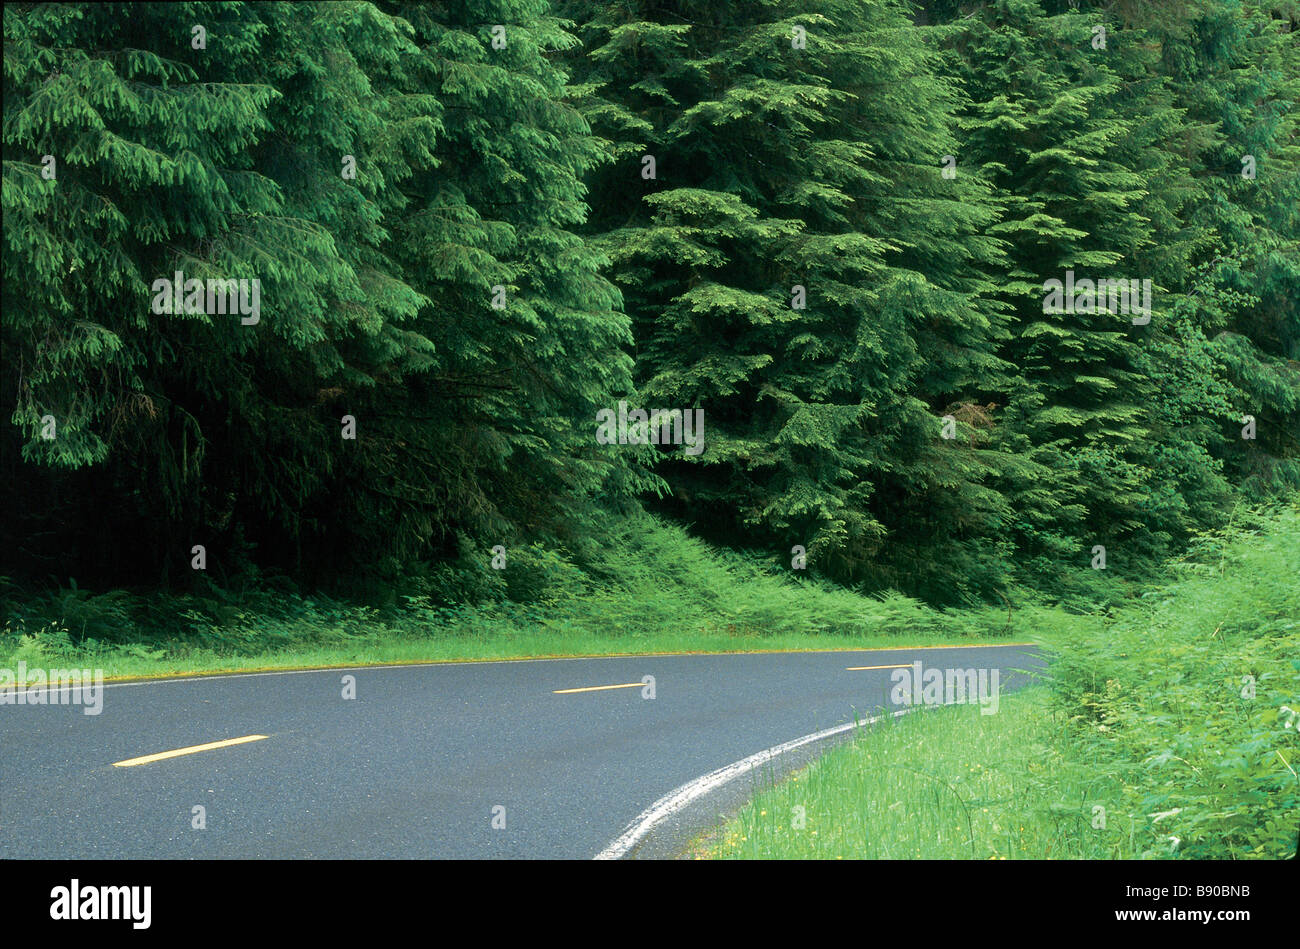 FL1079, BD Productions; Bending Country Road Stock Photo